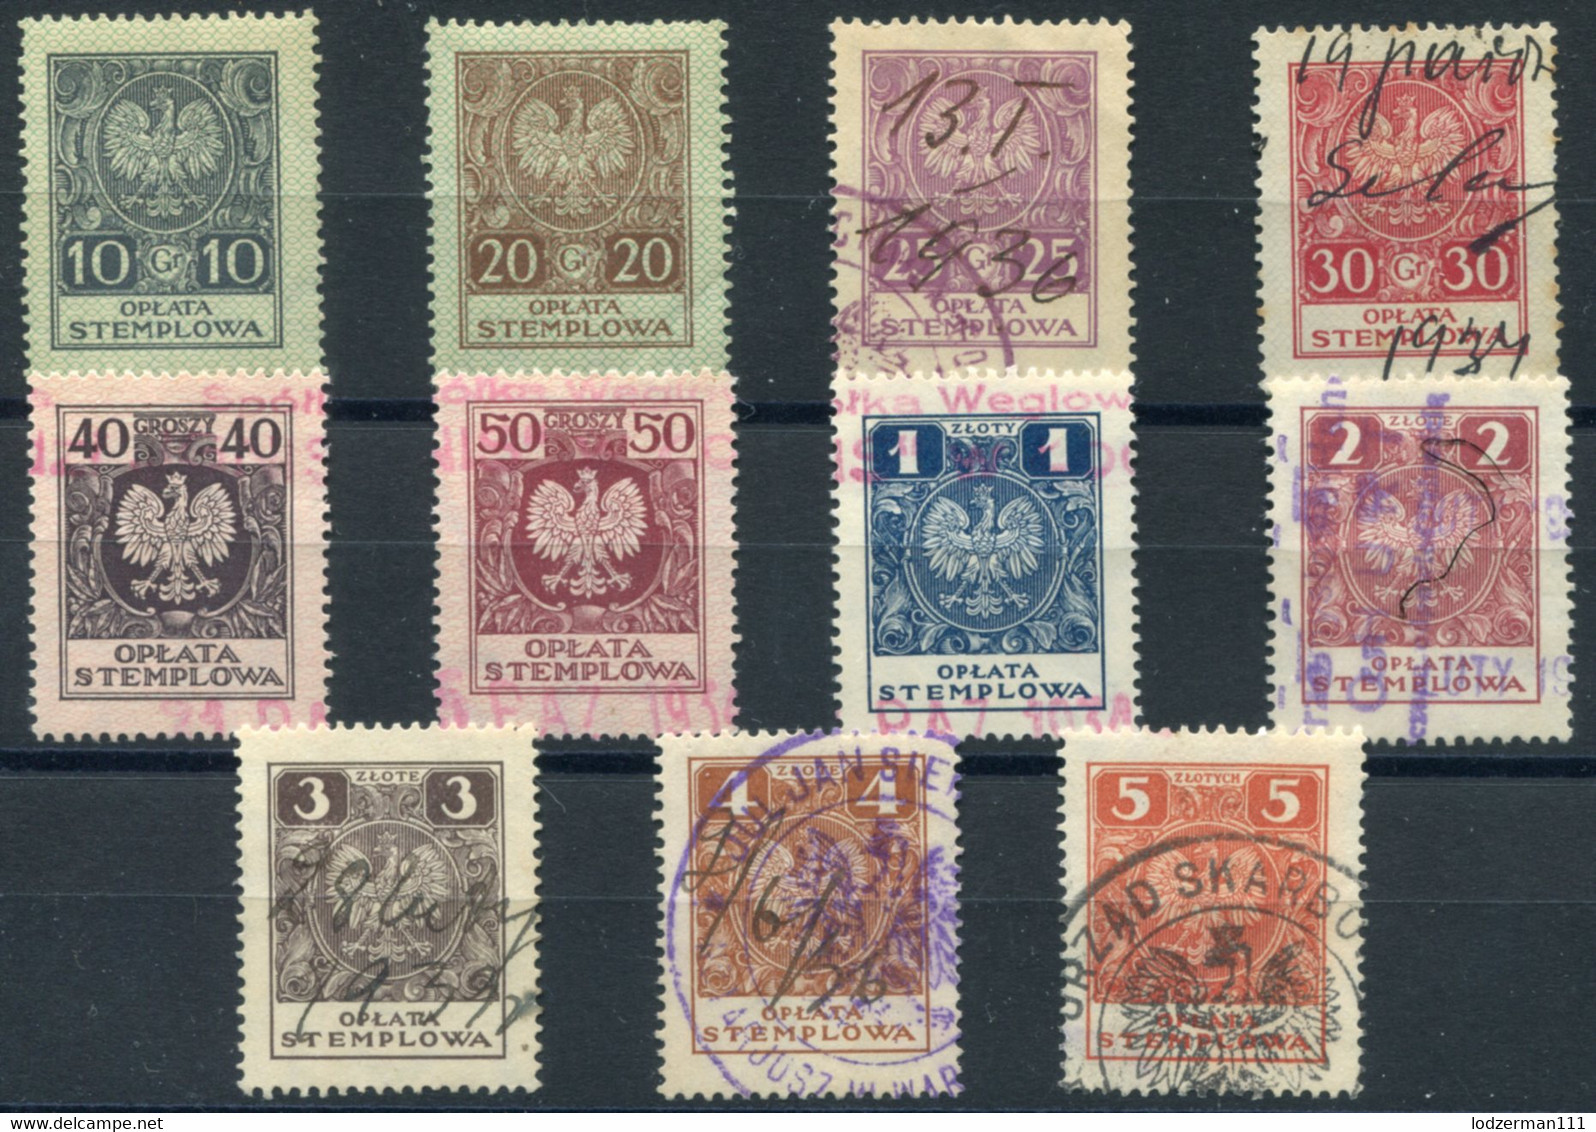 1932 General Zloty Issue #100-110 Compl. Set Used (2 MNH) All VF - Fiscaux